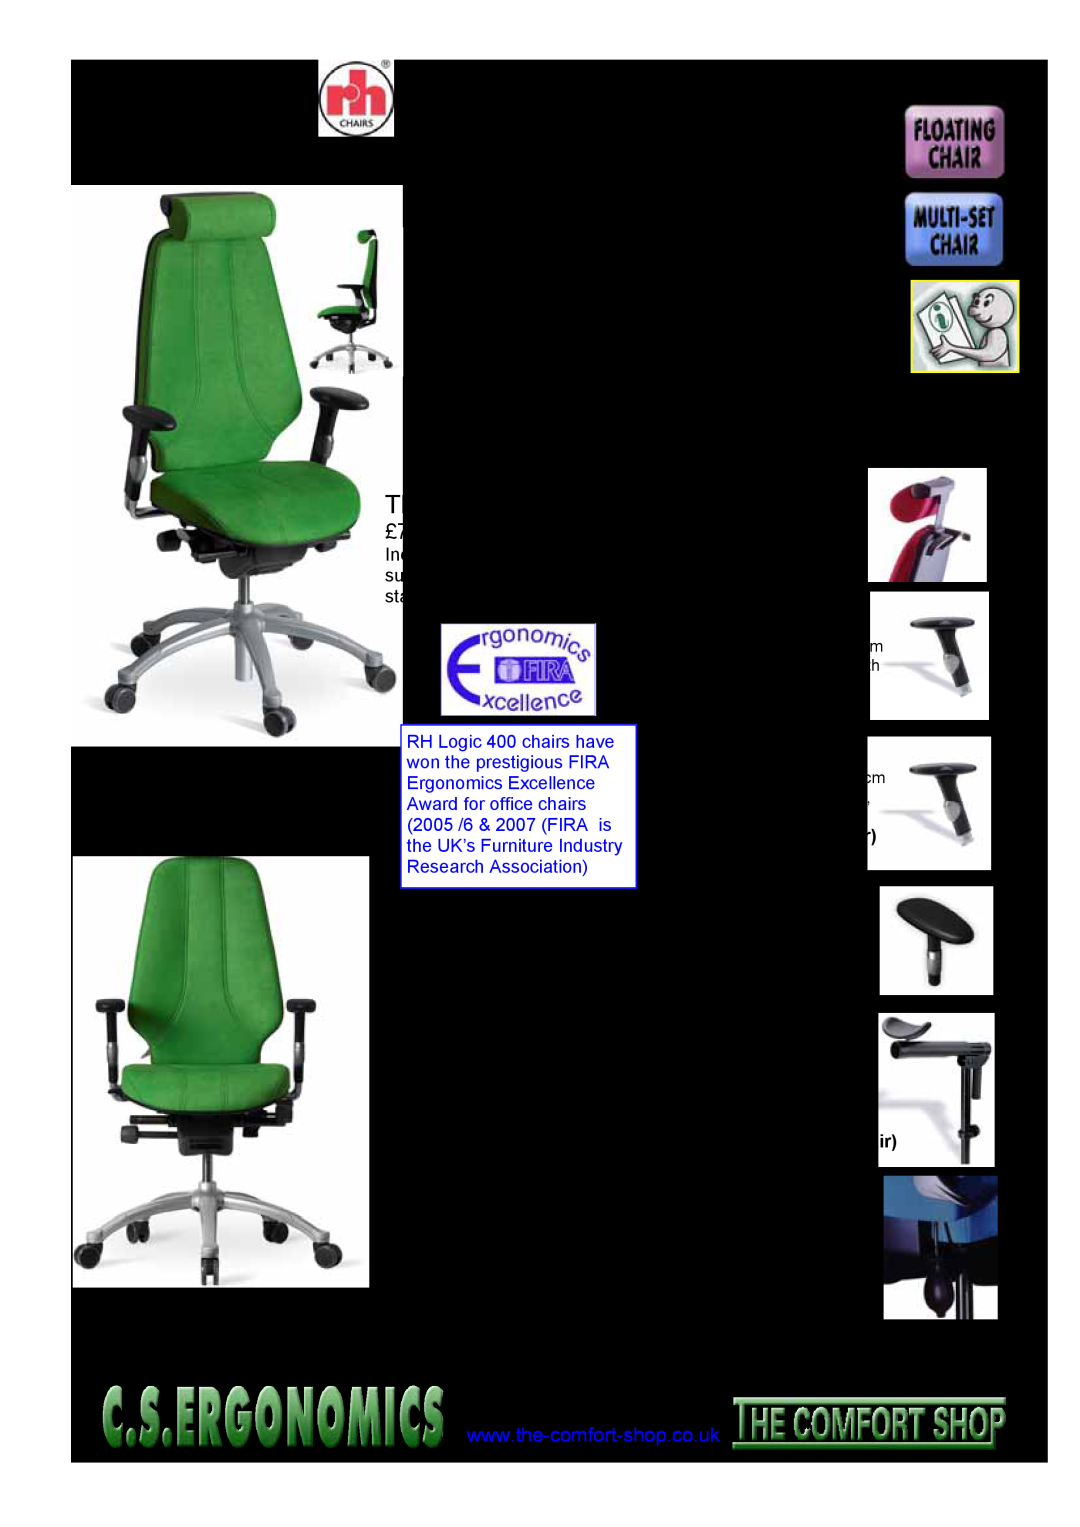 Fellowes RH 400 manual RH Logic, without neckrest, Swivel-toparms, Relax 3-Dfloating armrests, £72 + VAT £84.60 pair, 01253 